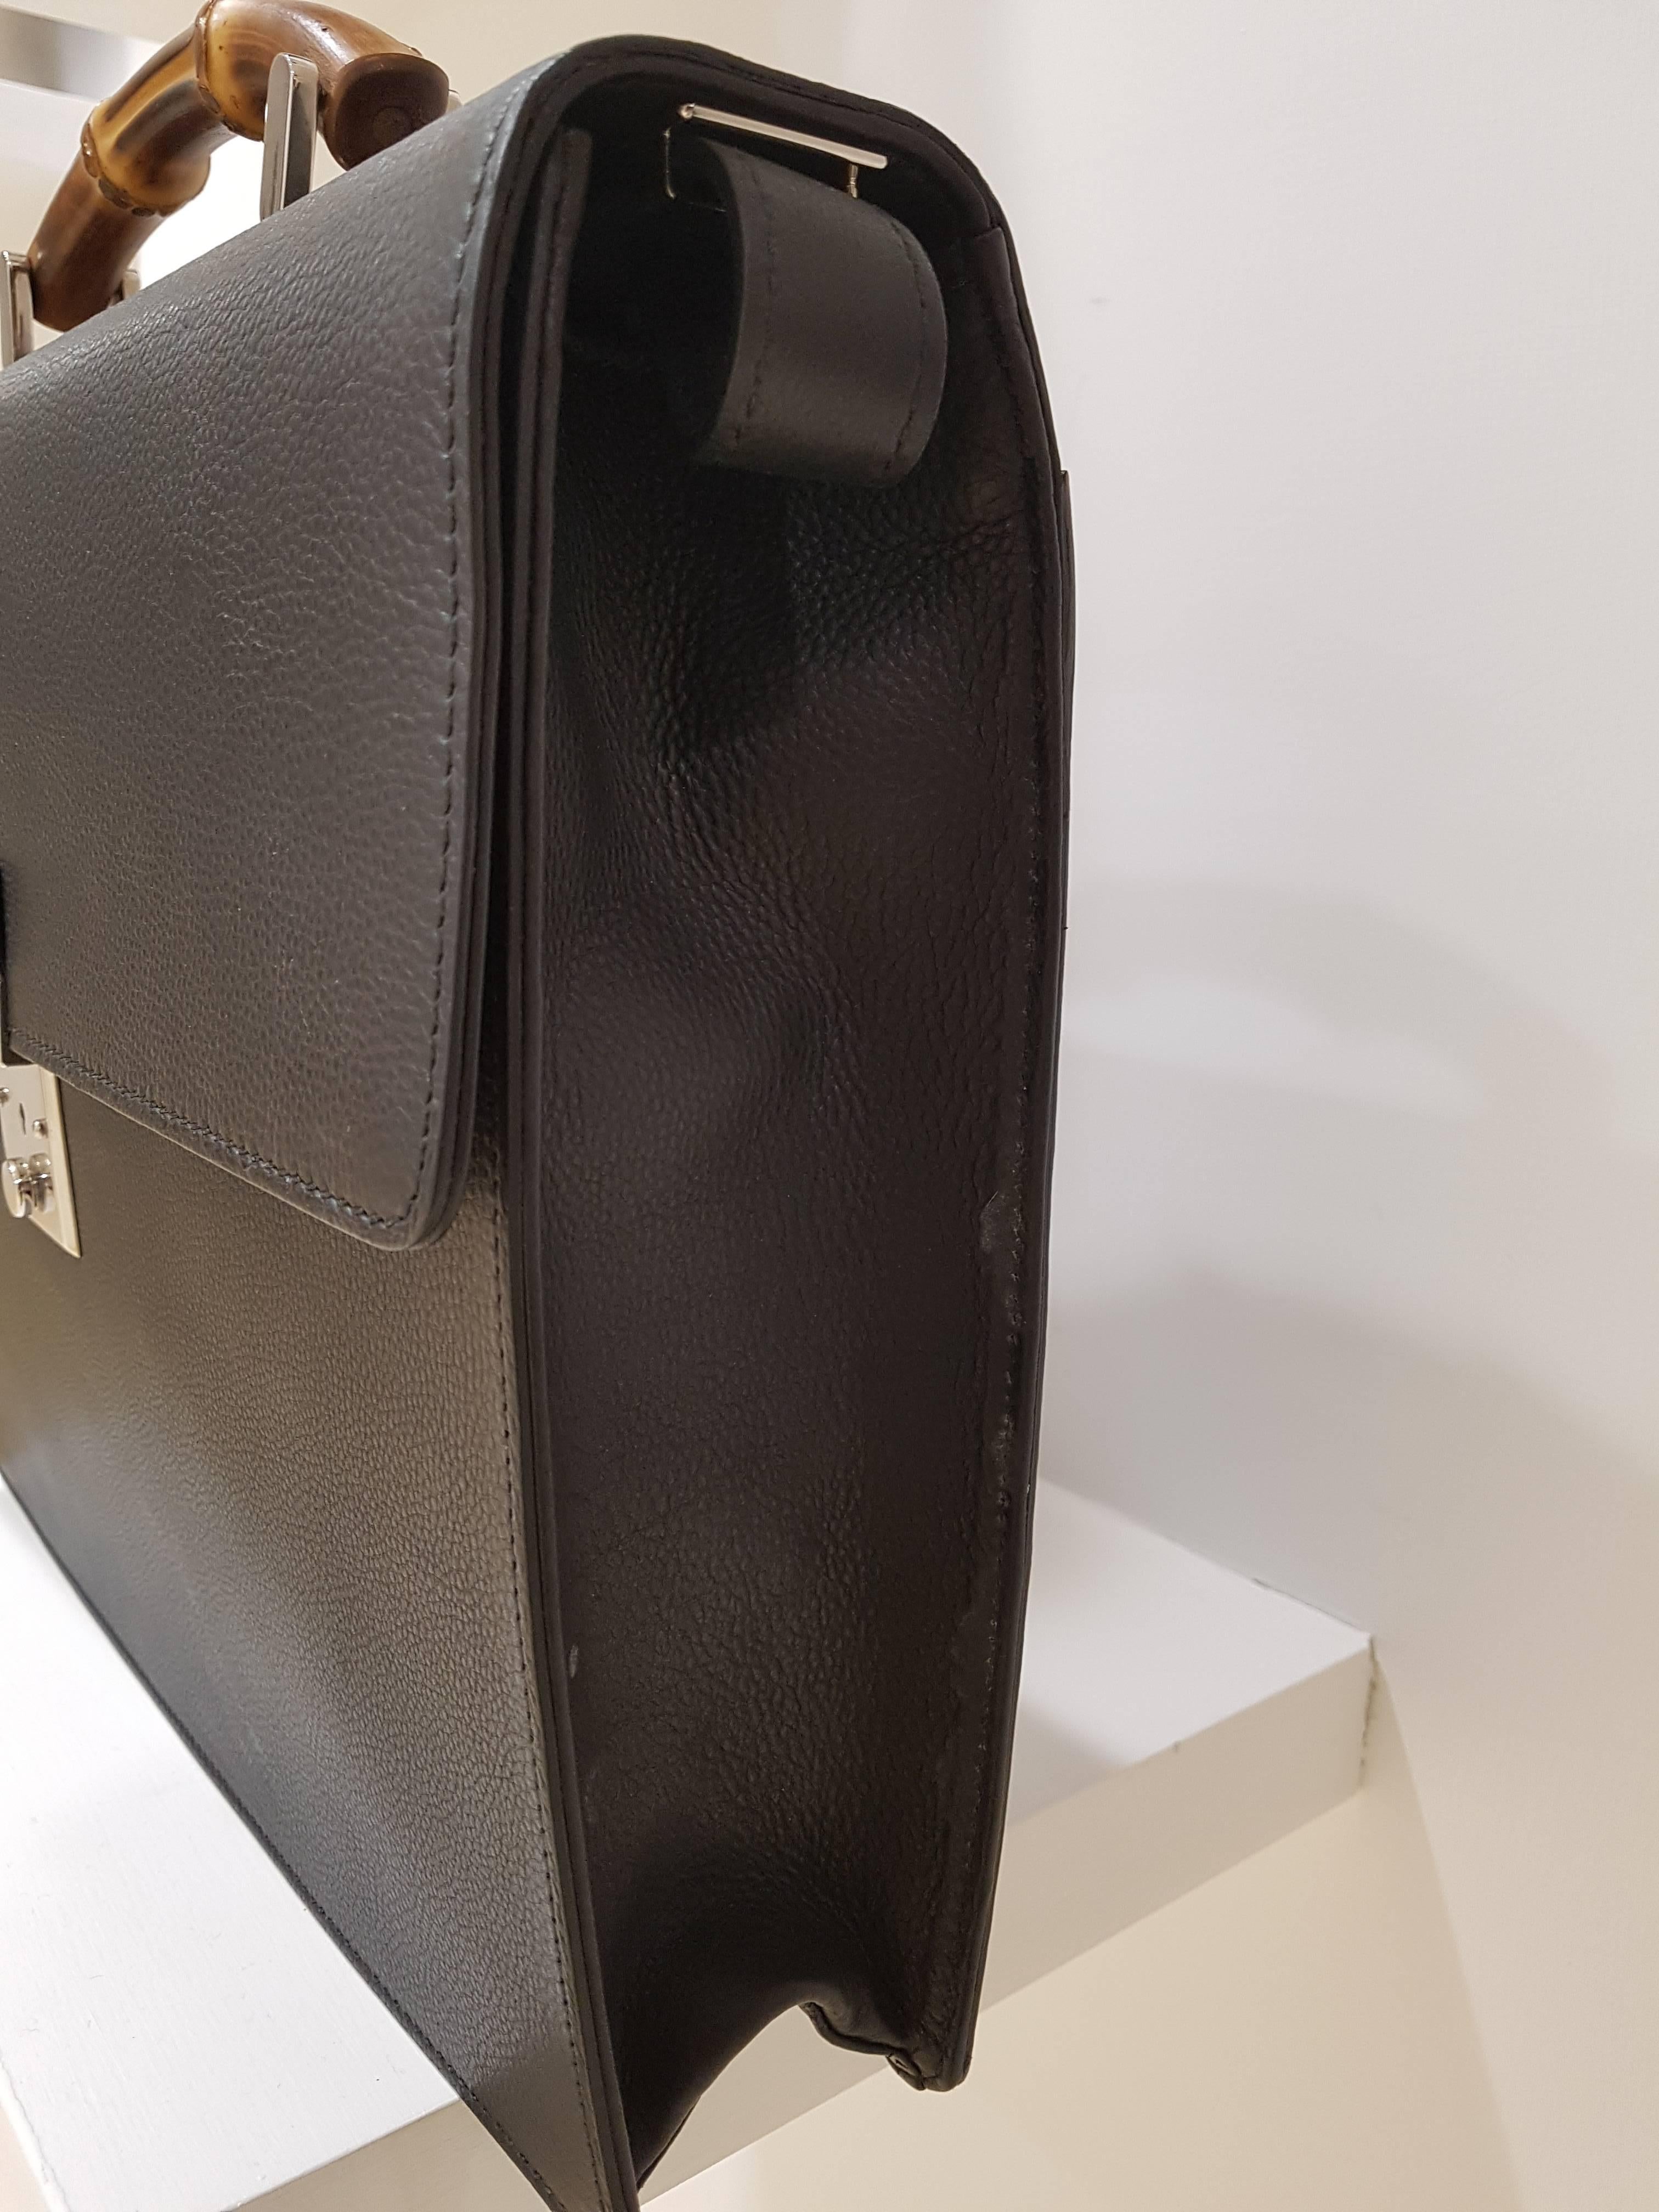 Gucci Bamboo Black Leather Case NWOT

Unworn case made in italy by Gucci
on the back there is a pocket in the inside 2 more pockets

bag is unworn still with cards and dust bag